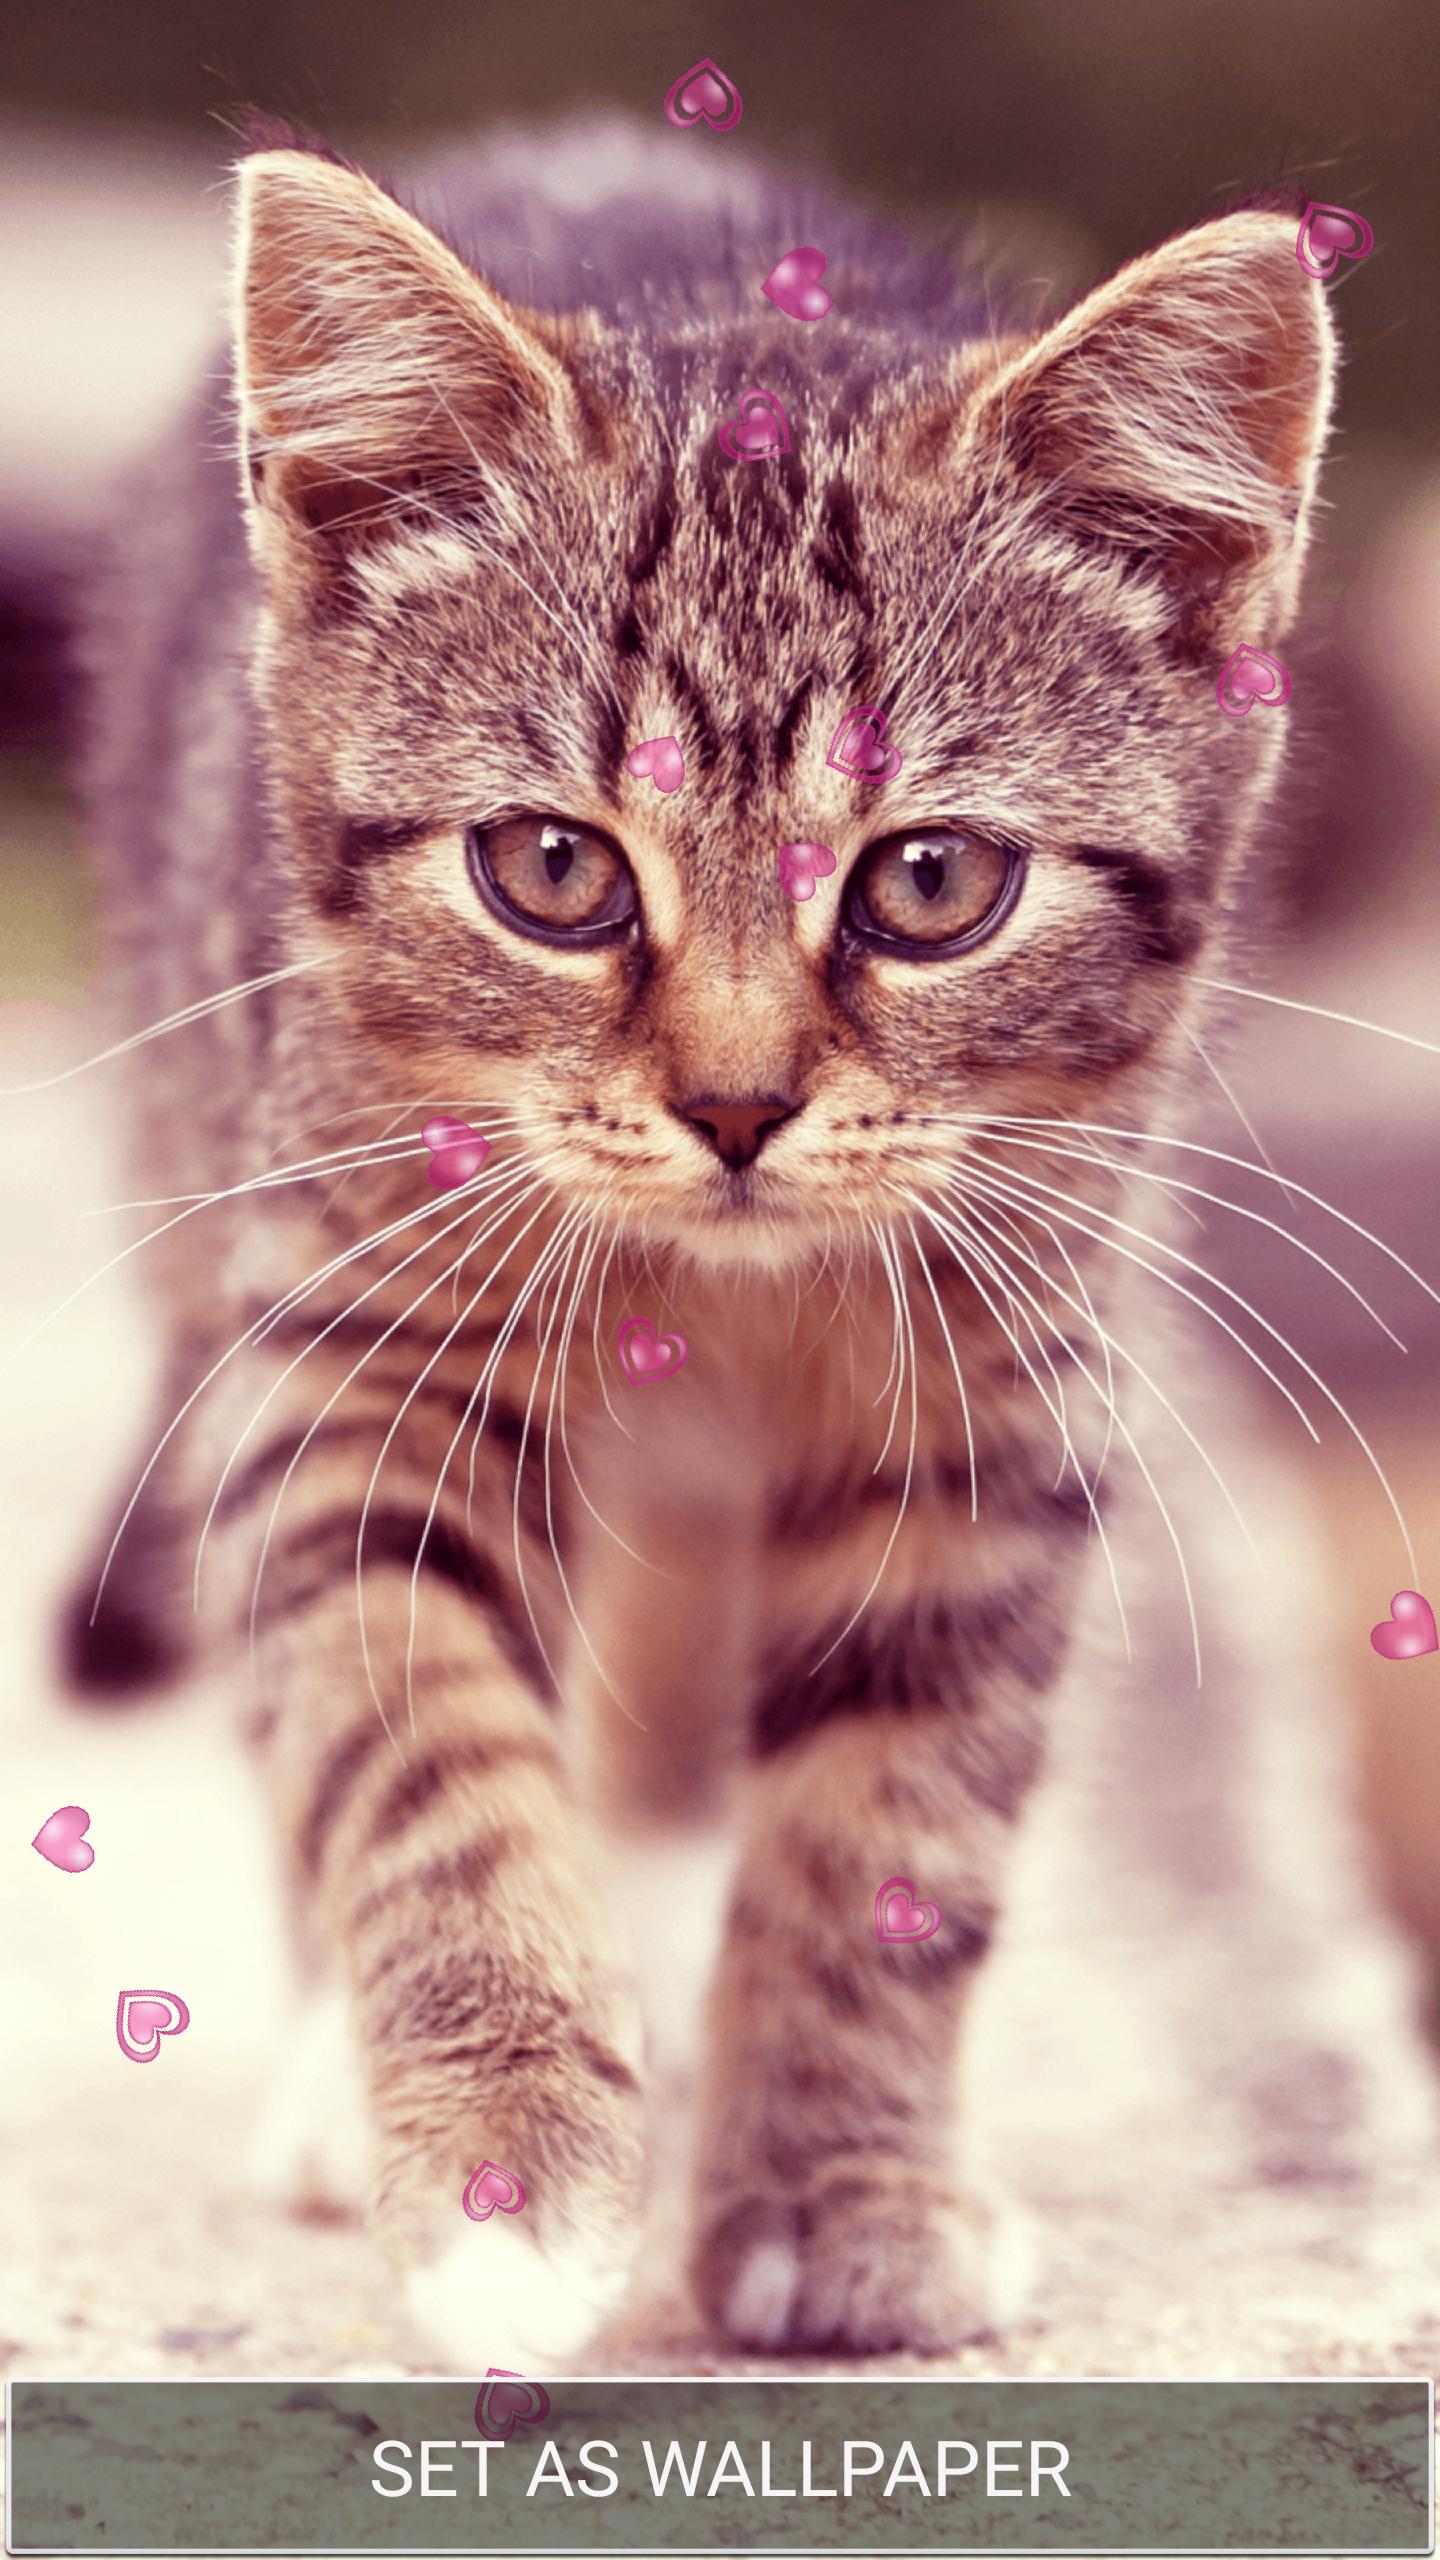 Anak Kucing Lucu Wallpaper For Android APK Download